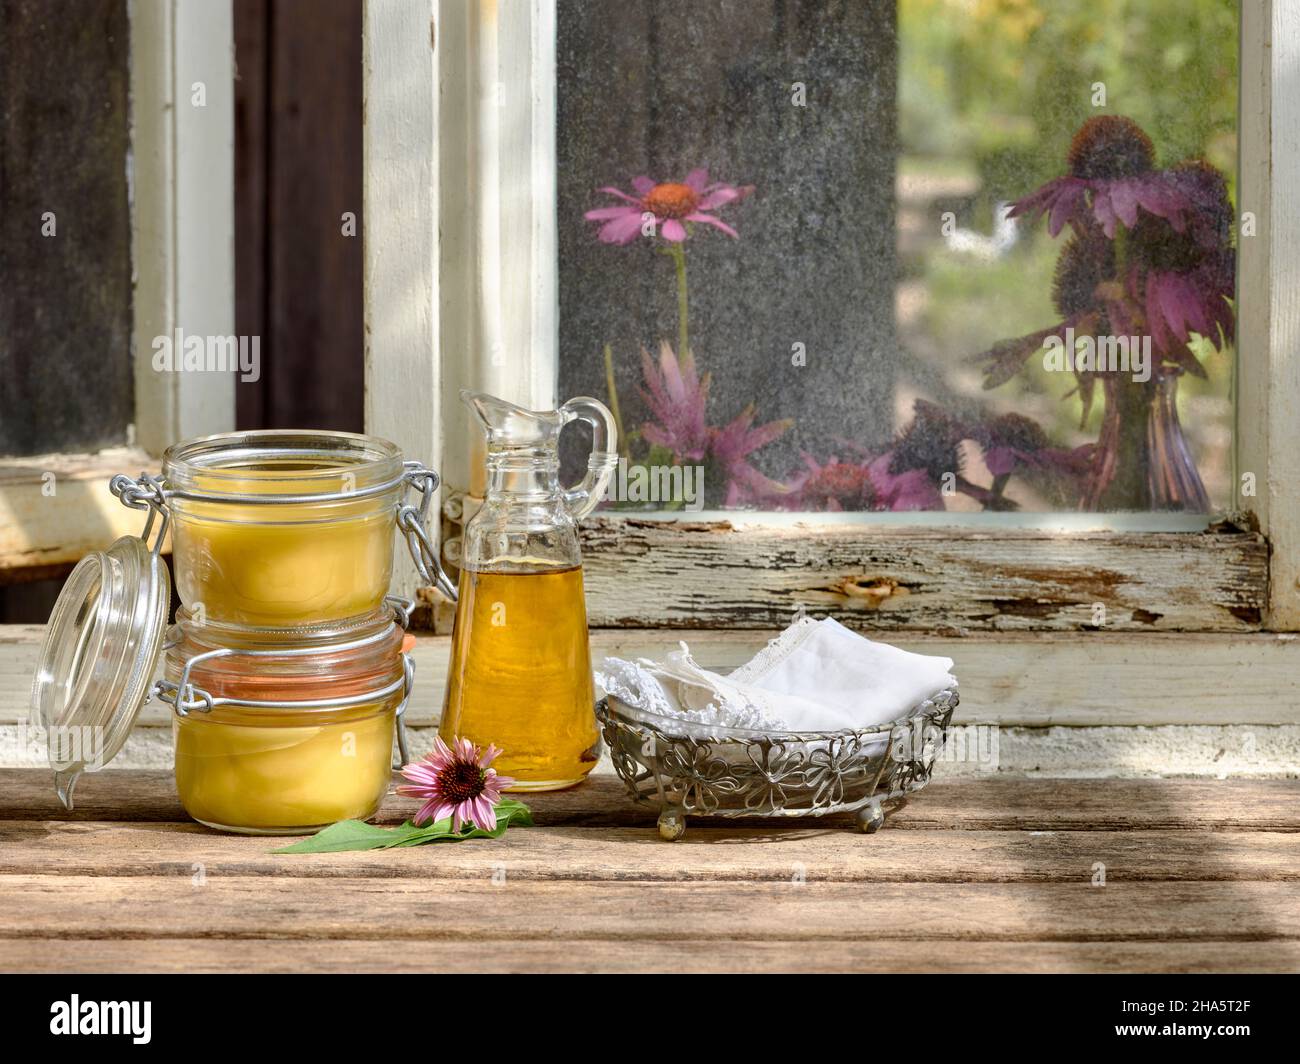 two storage jars filled with echinacea ointment and a glass carafe of vegetable oil stand together with a metal basket and textile handkerchiefs on a wooden table in front of a workshop window Stock Photo